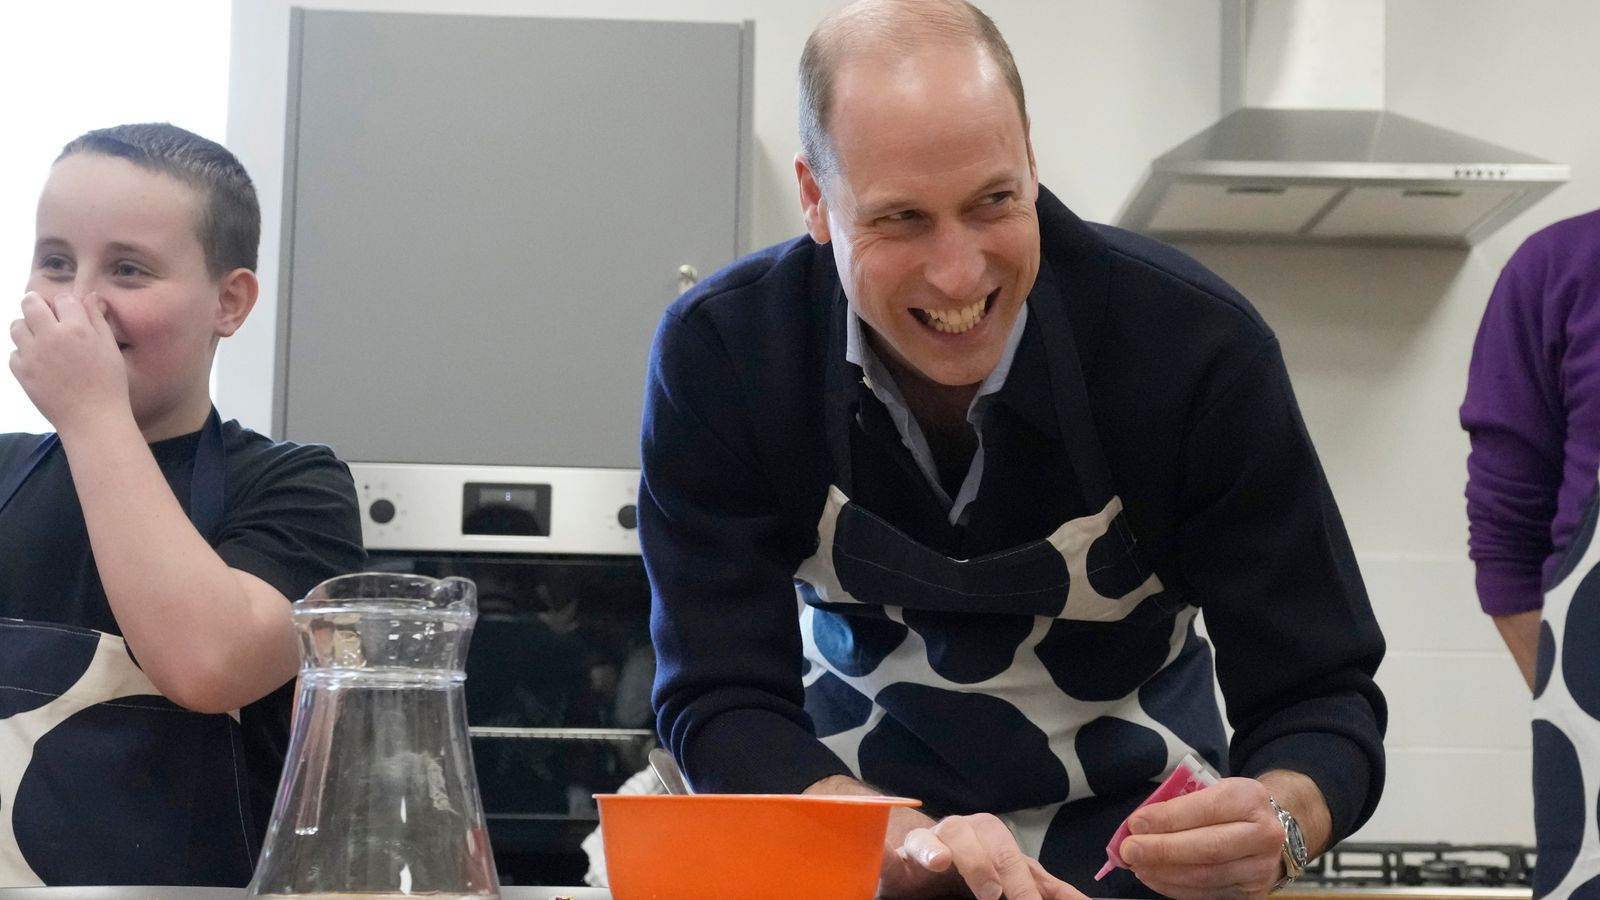 Prince William sings wife Kate's praises on youth centre visit